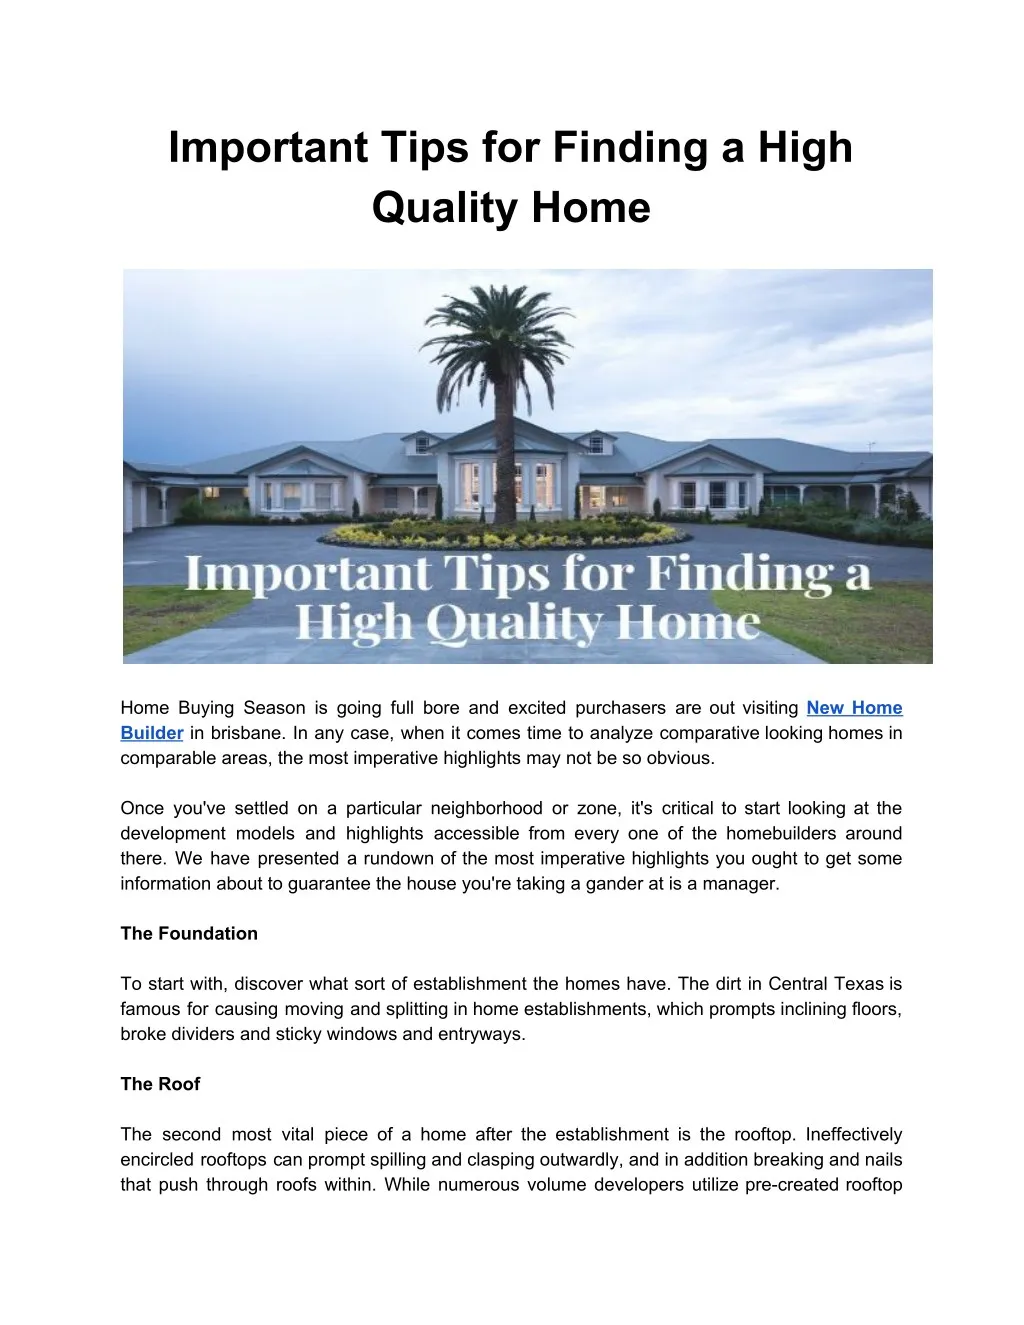 important tips for finding a high quality home